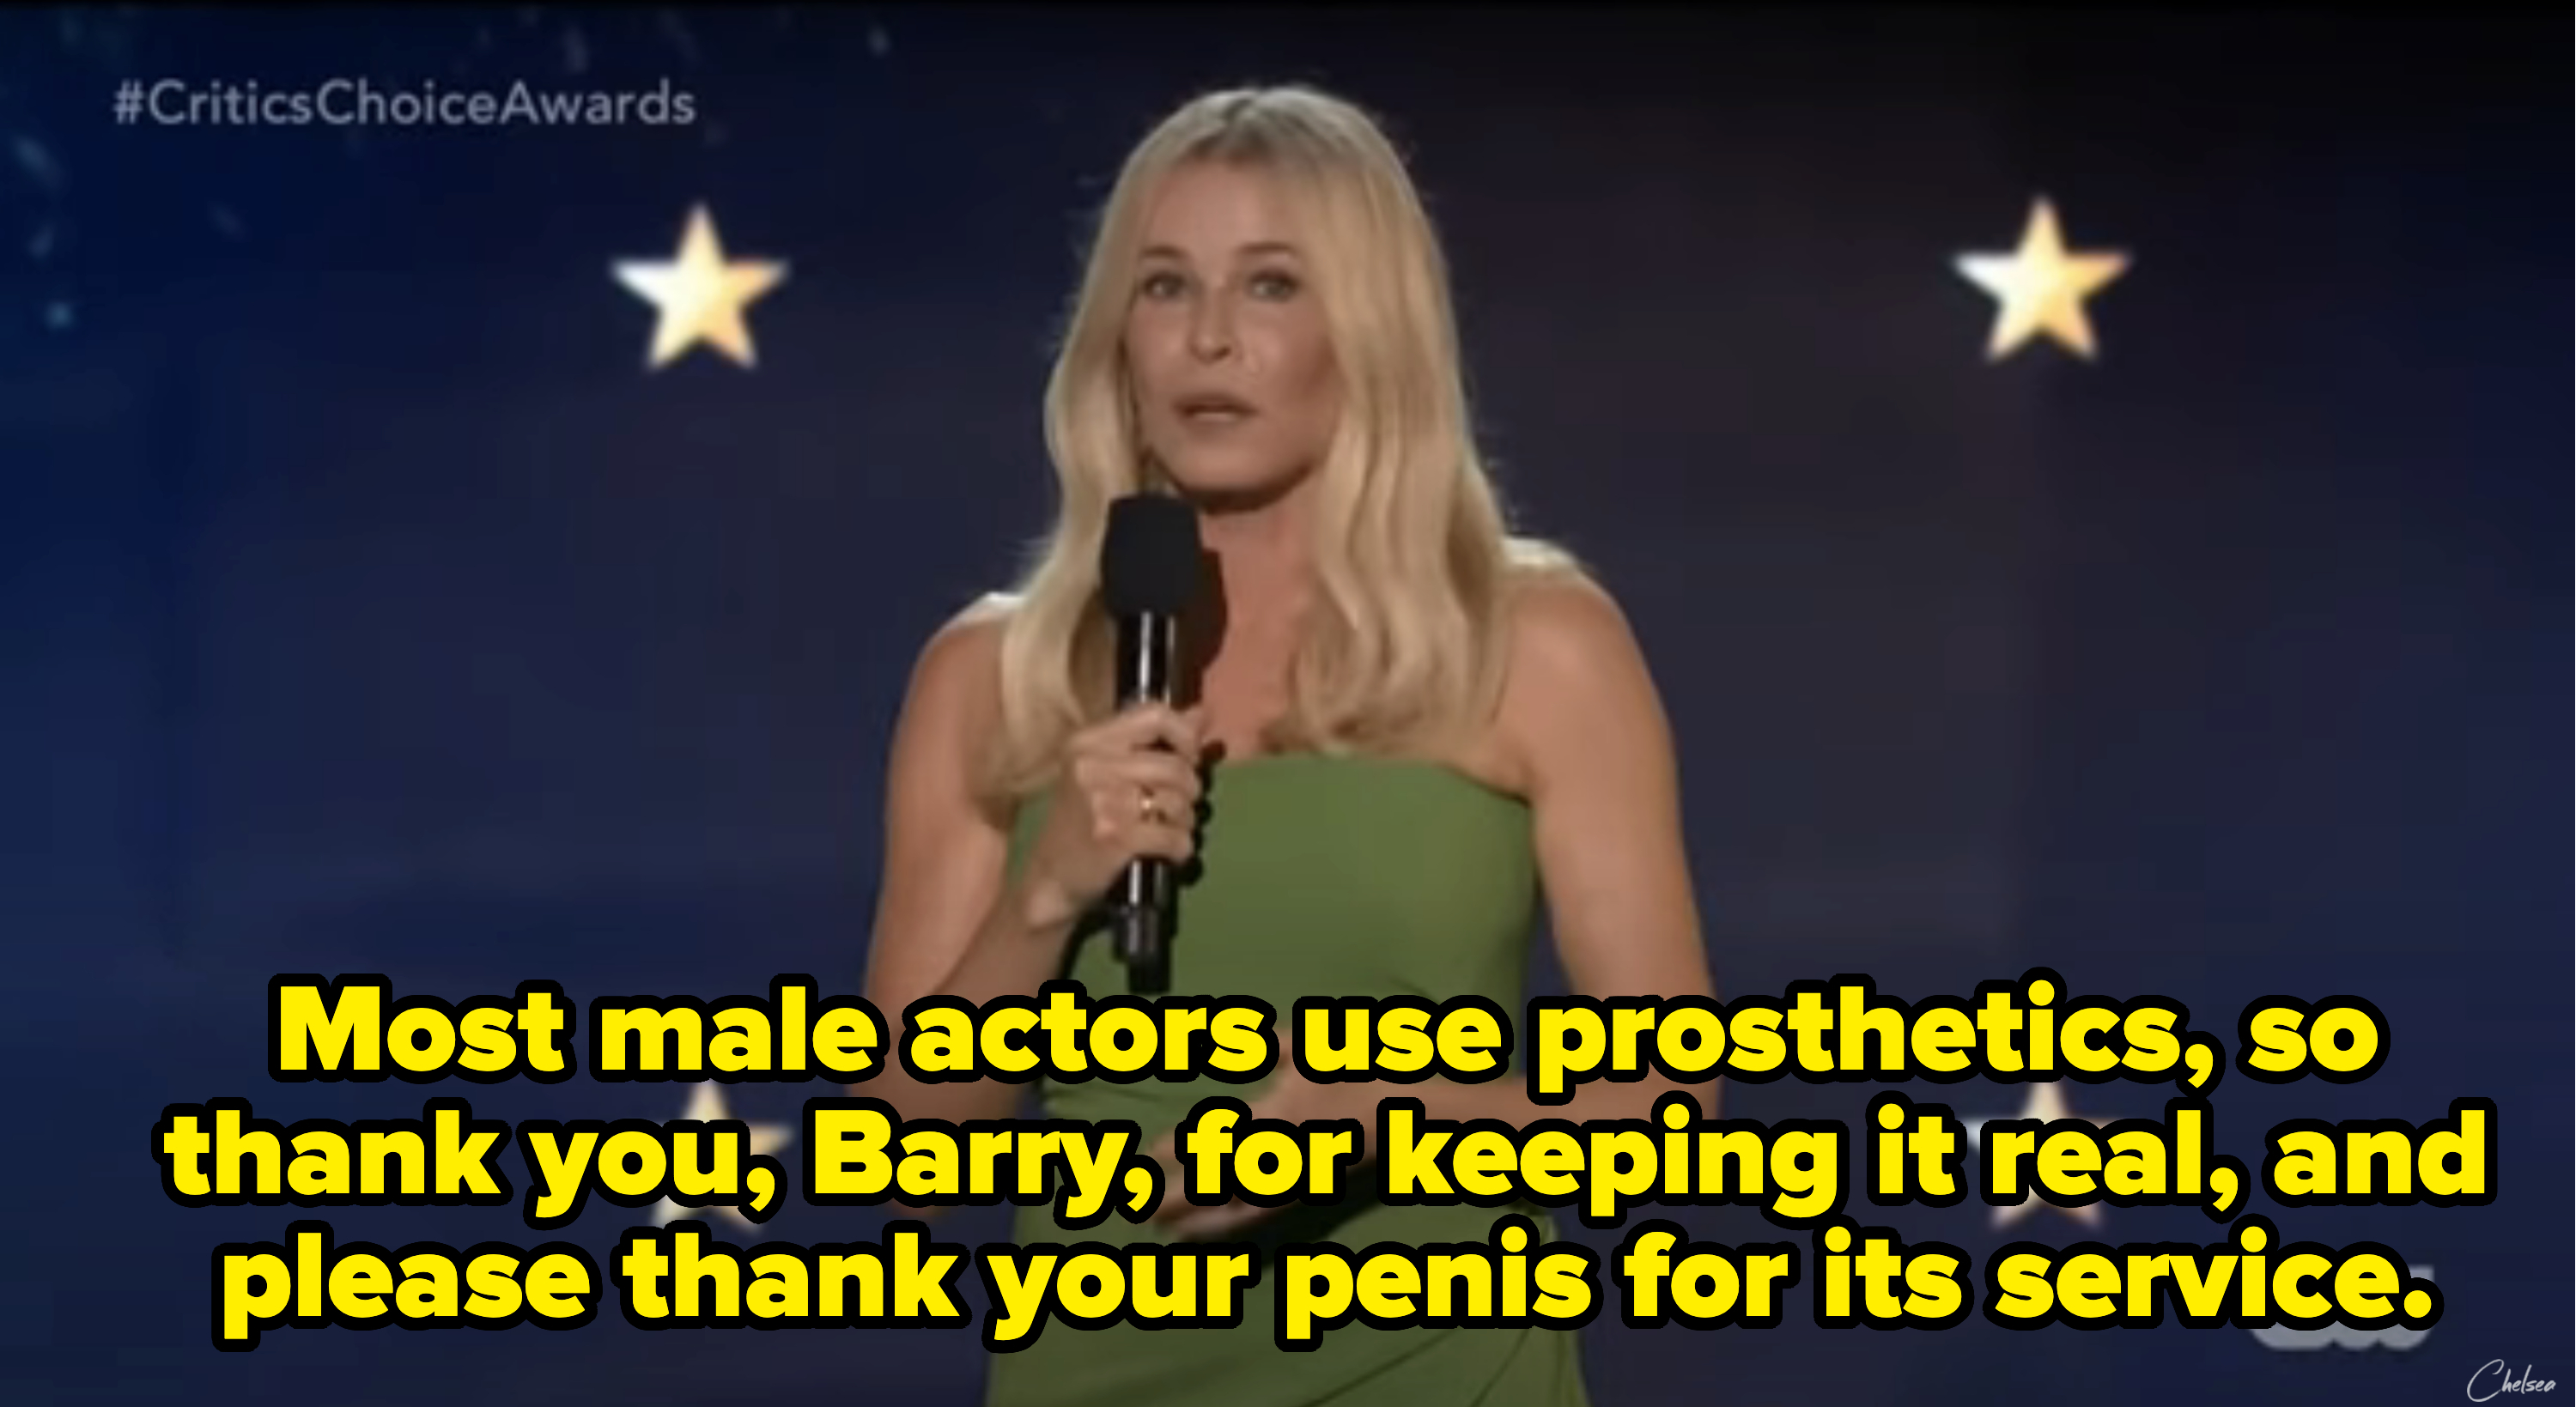 Chelsea says, &quot;Most male actors use prosthetics, so thank you, Barry, for keeping it real, and please thank your penis for its service&quot;